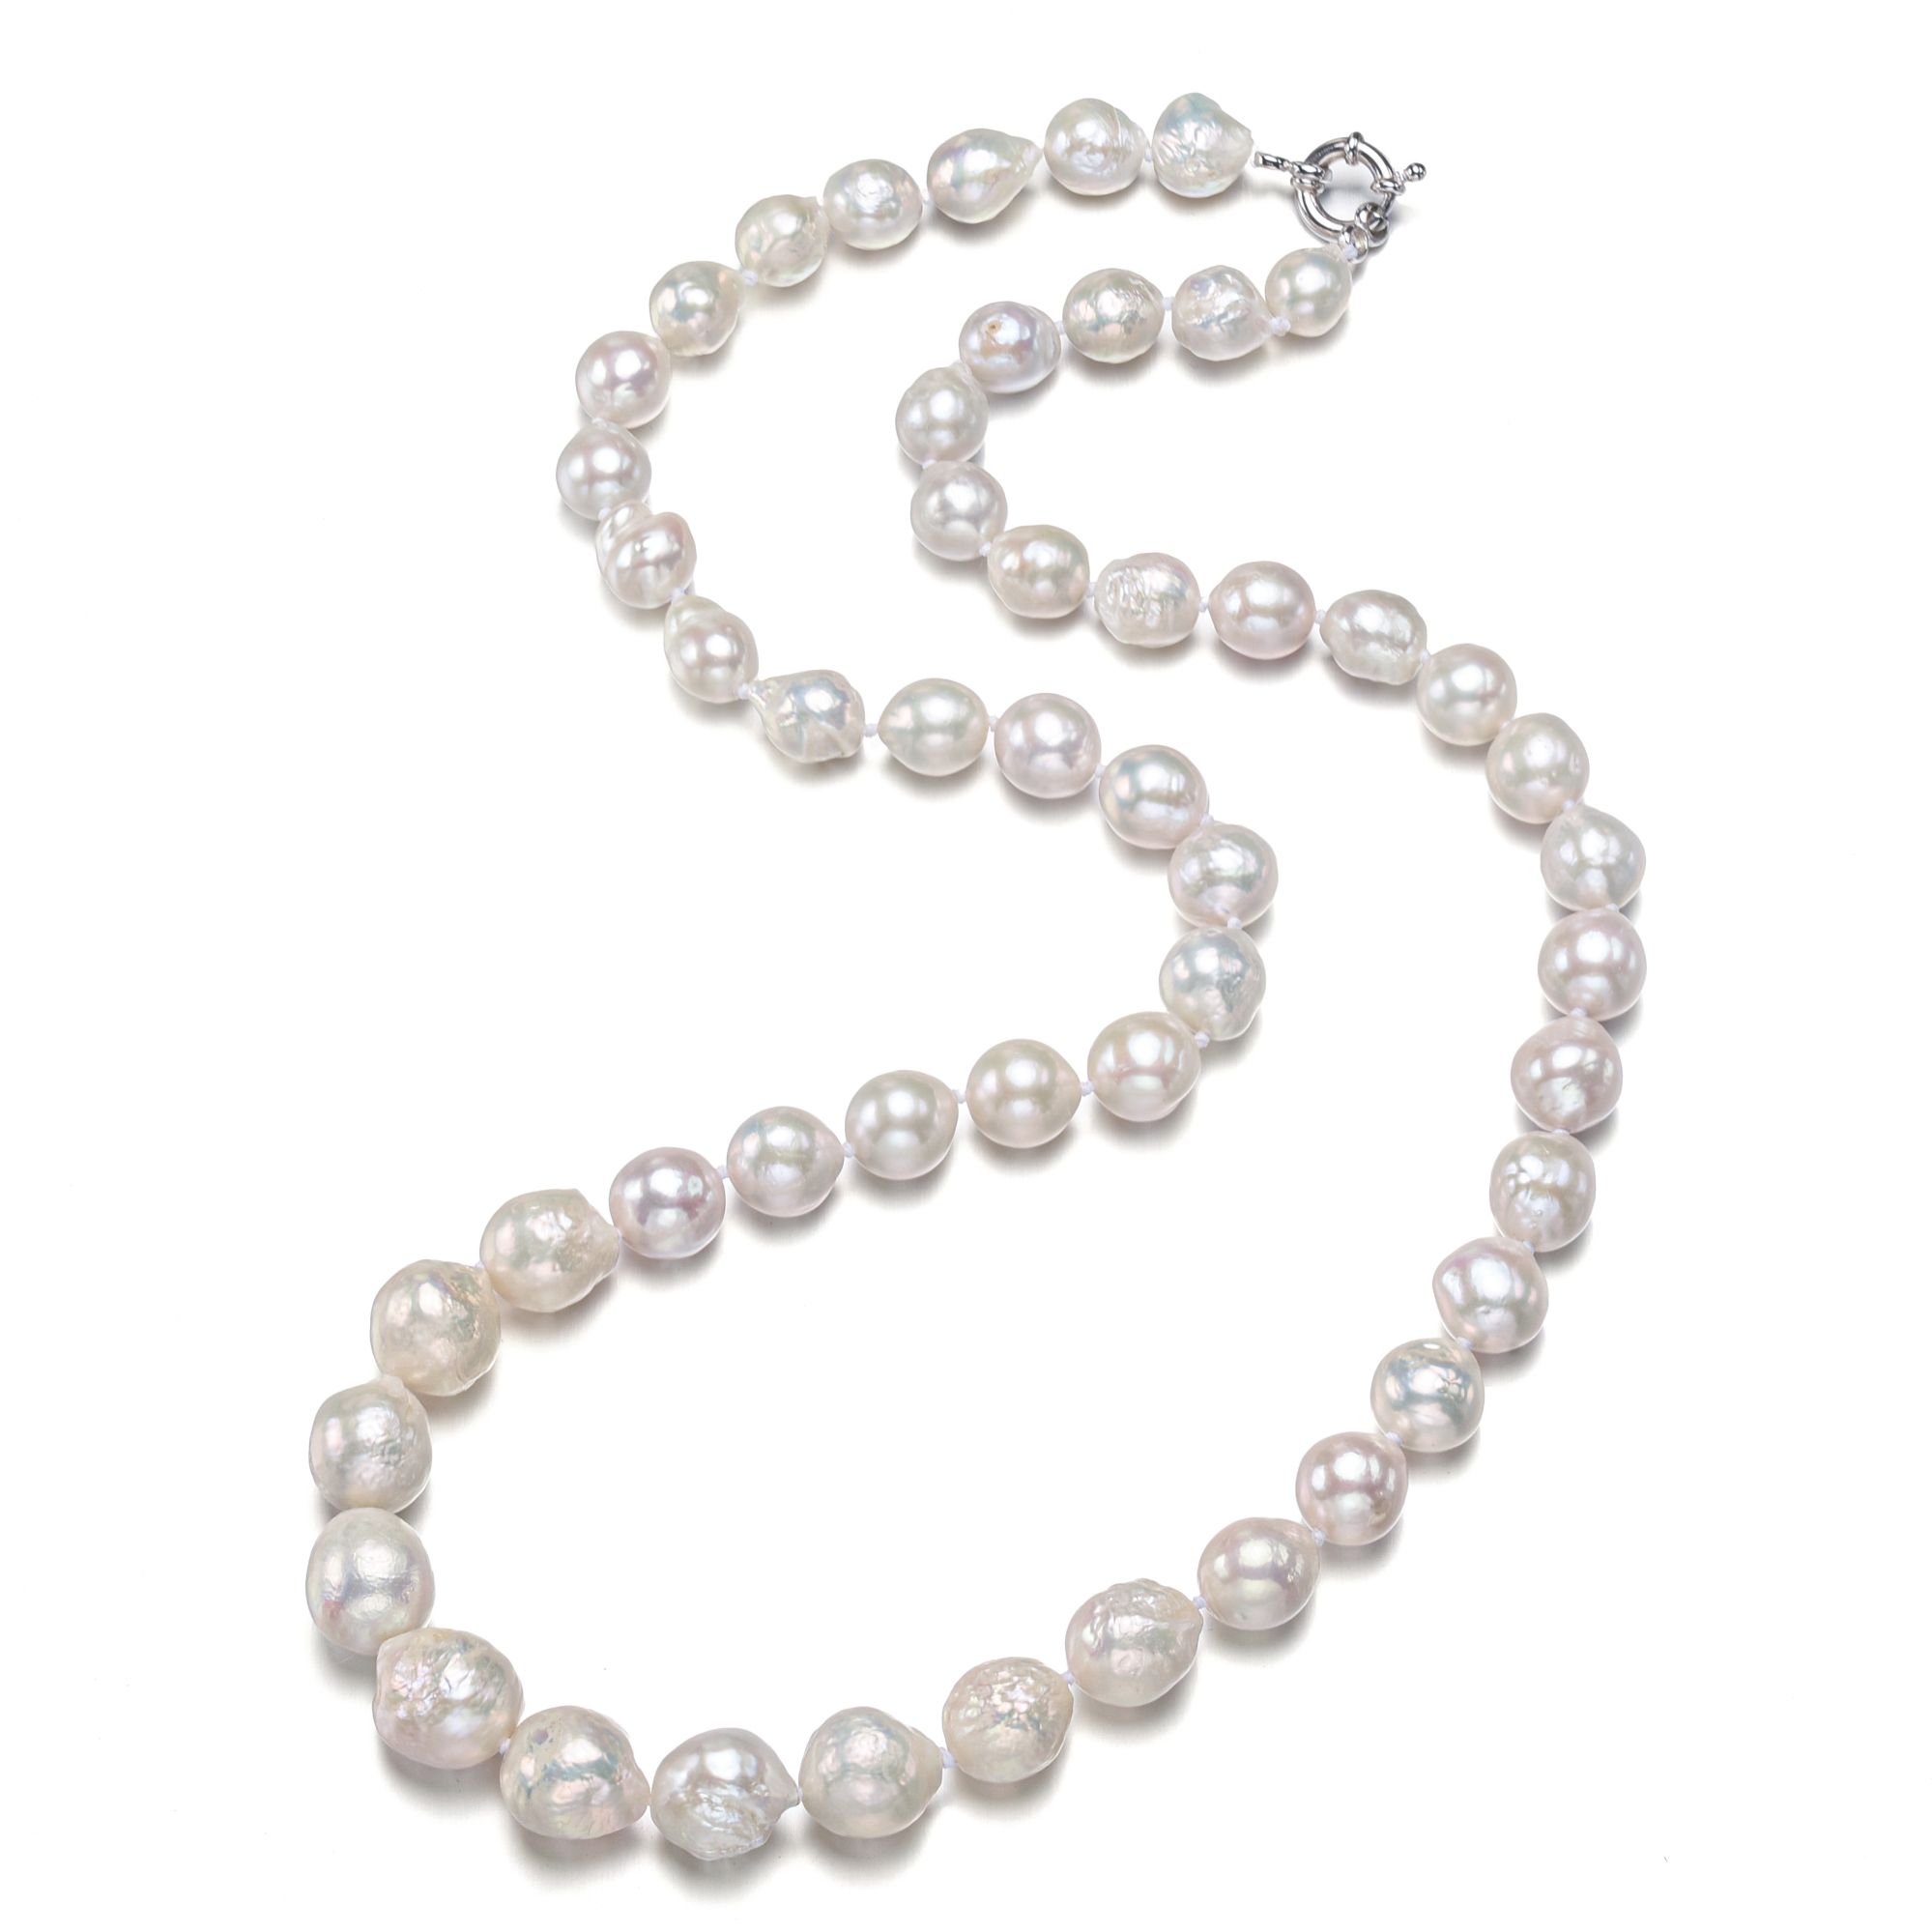 8-12mm graduated baroque edison white 20 inches freshwater cultured pearl necklace